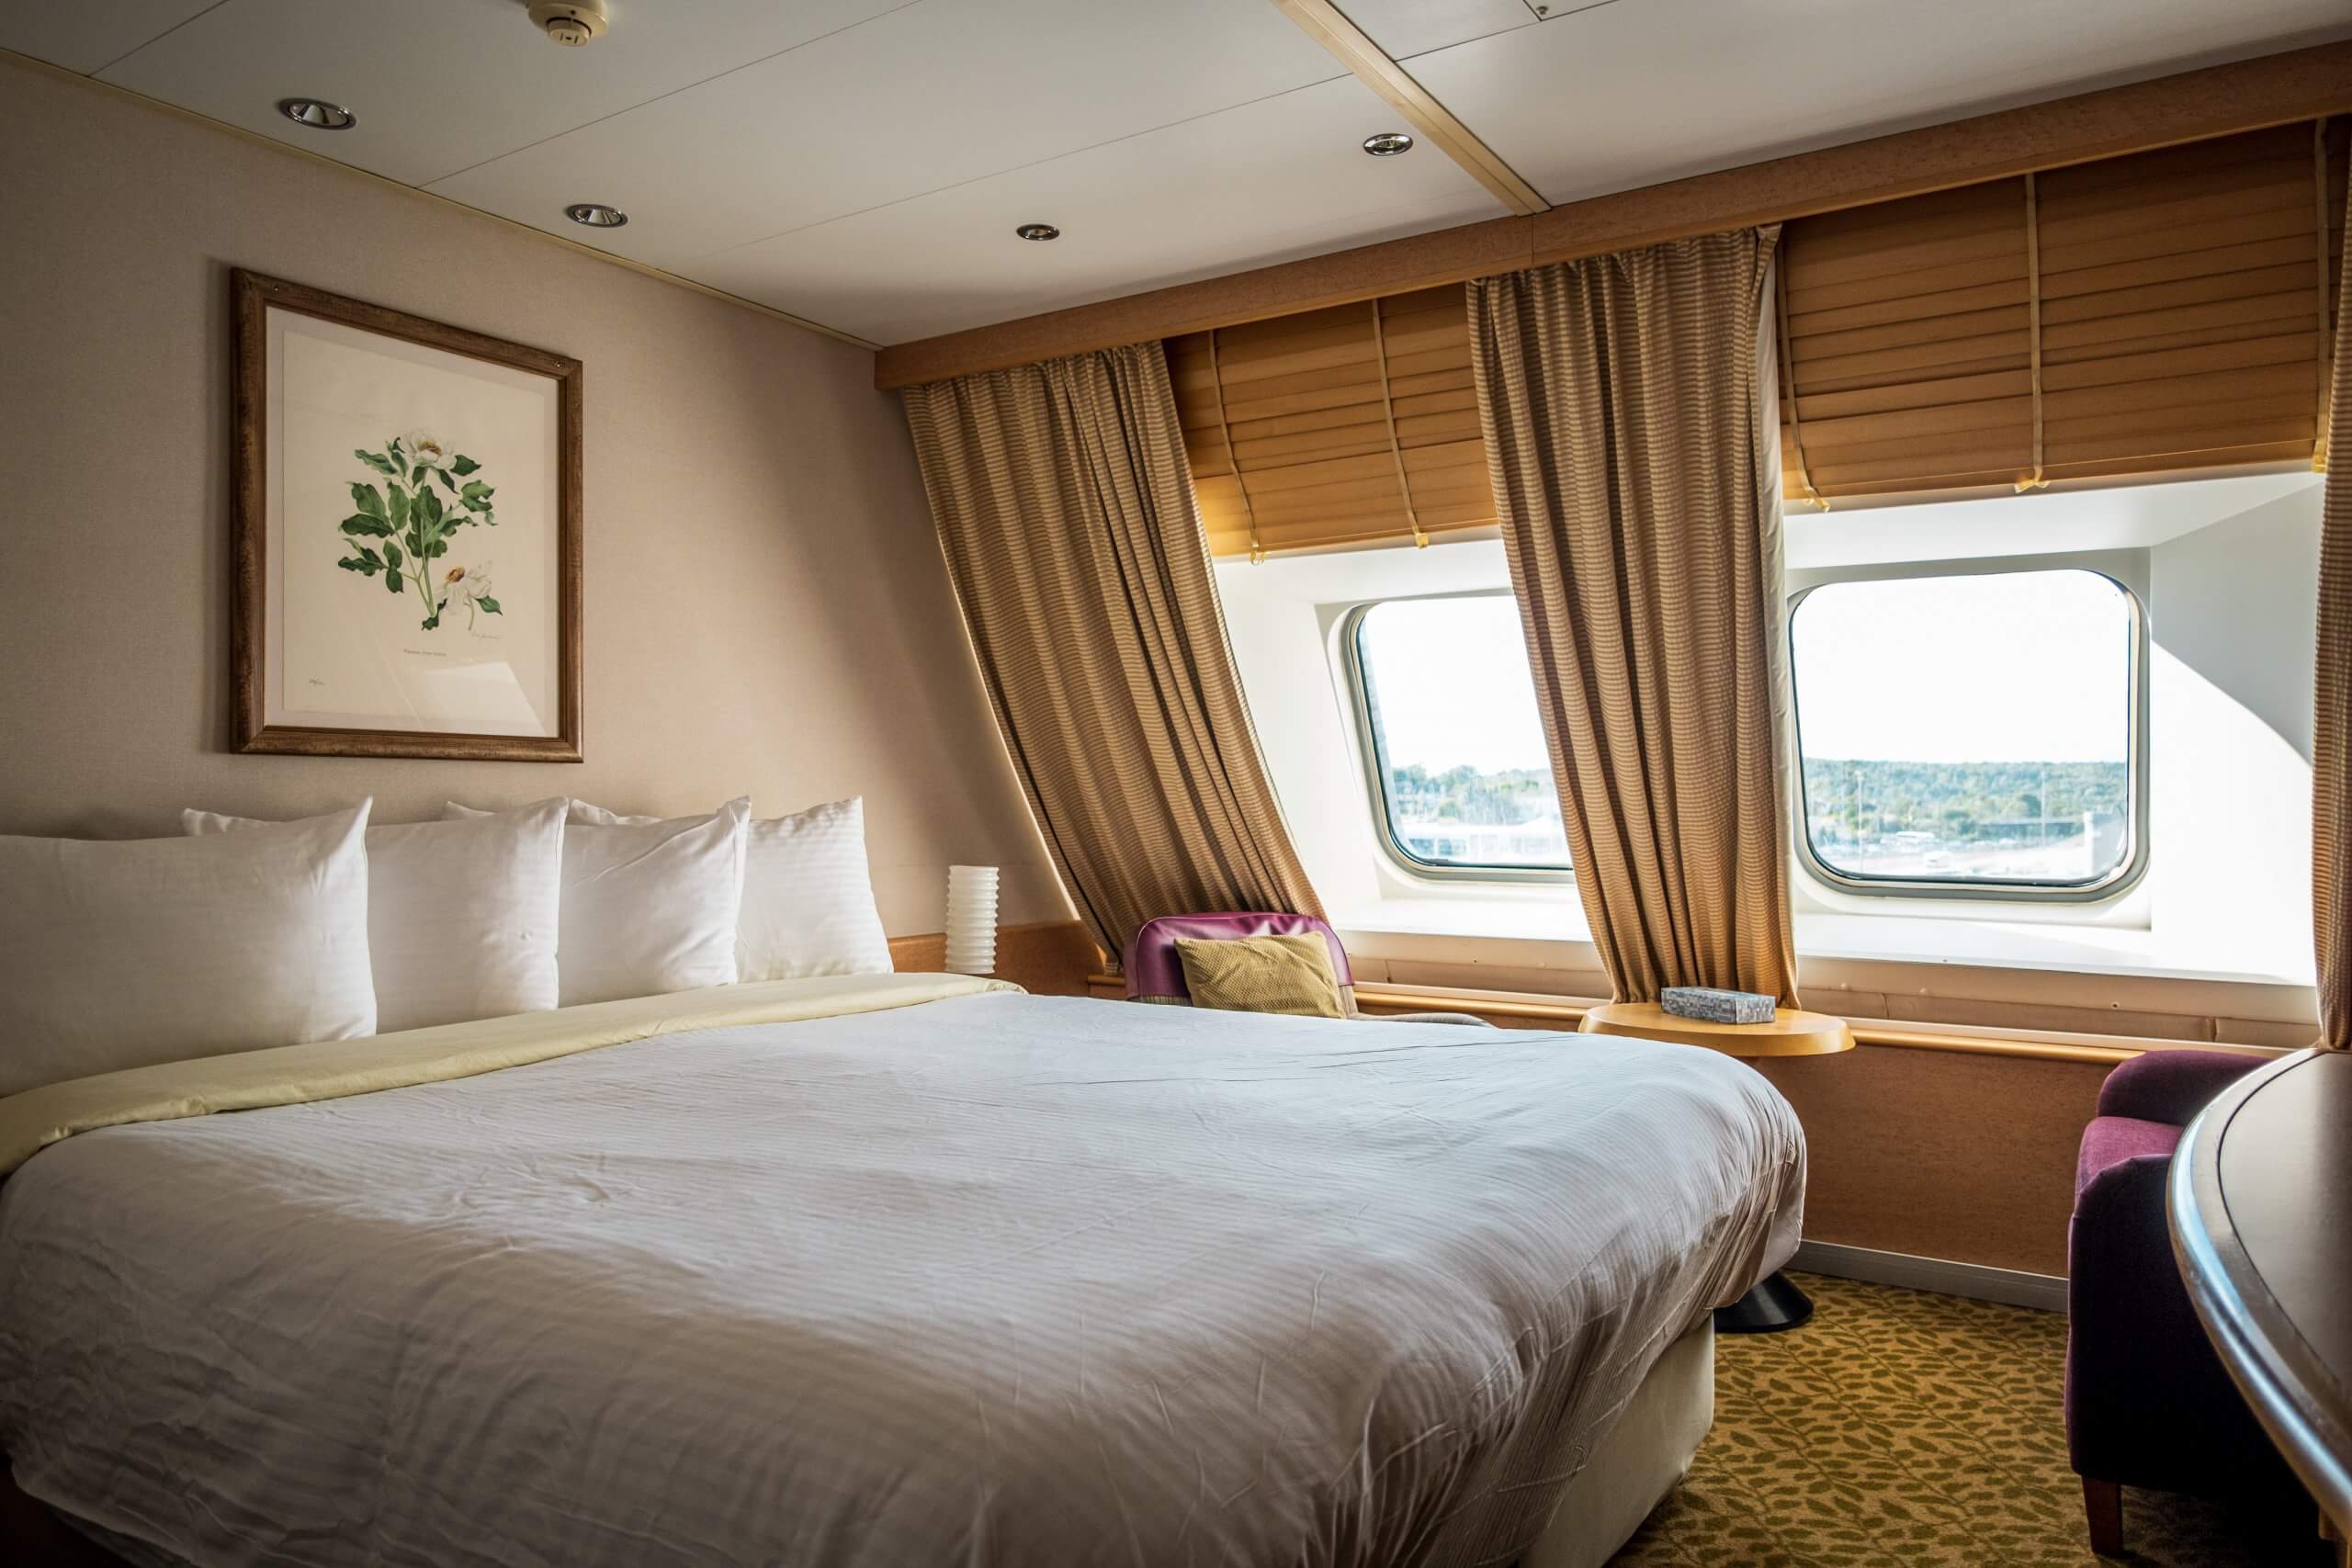 Interior of a deluxe cabin on the Newfoundland ferry